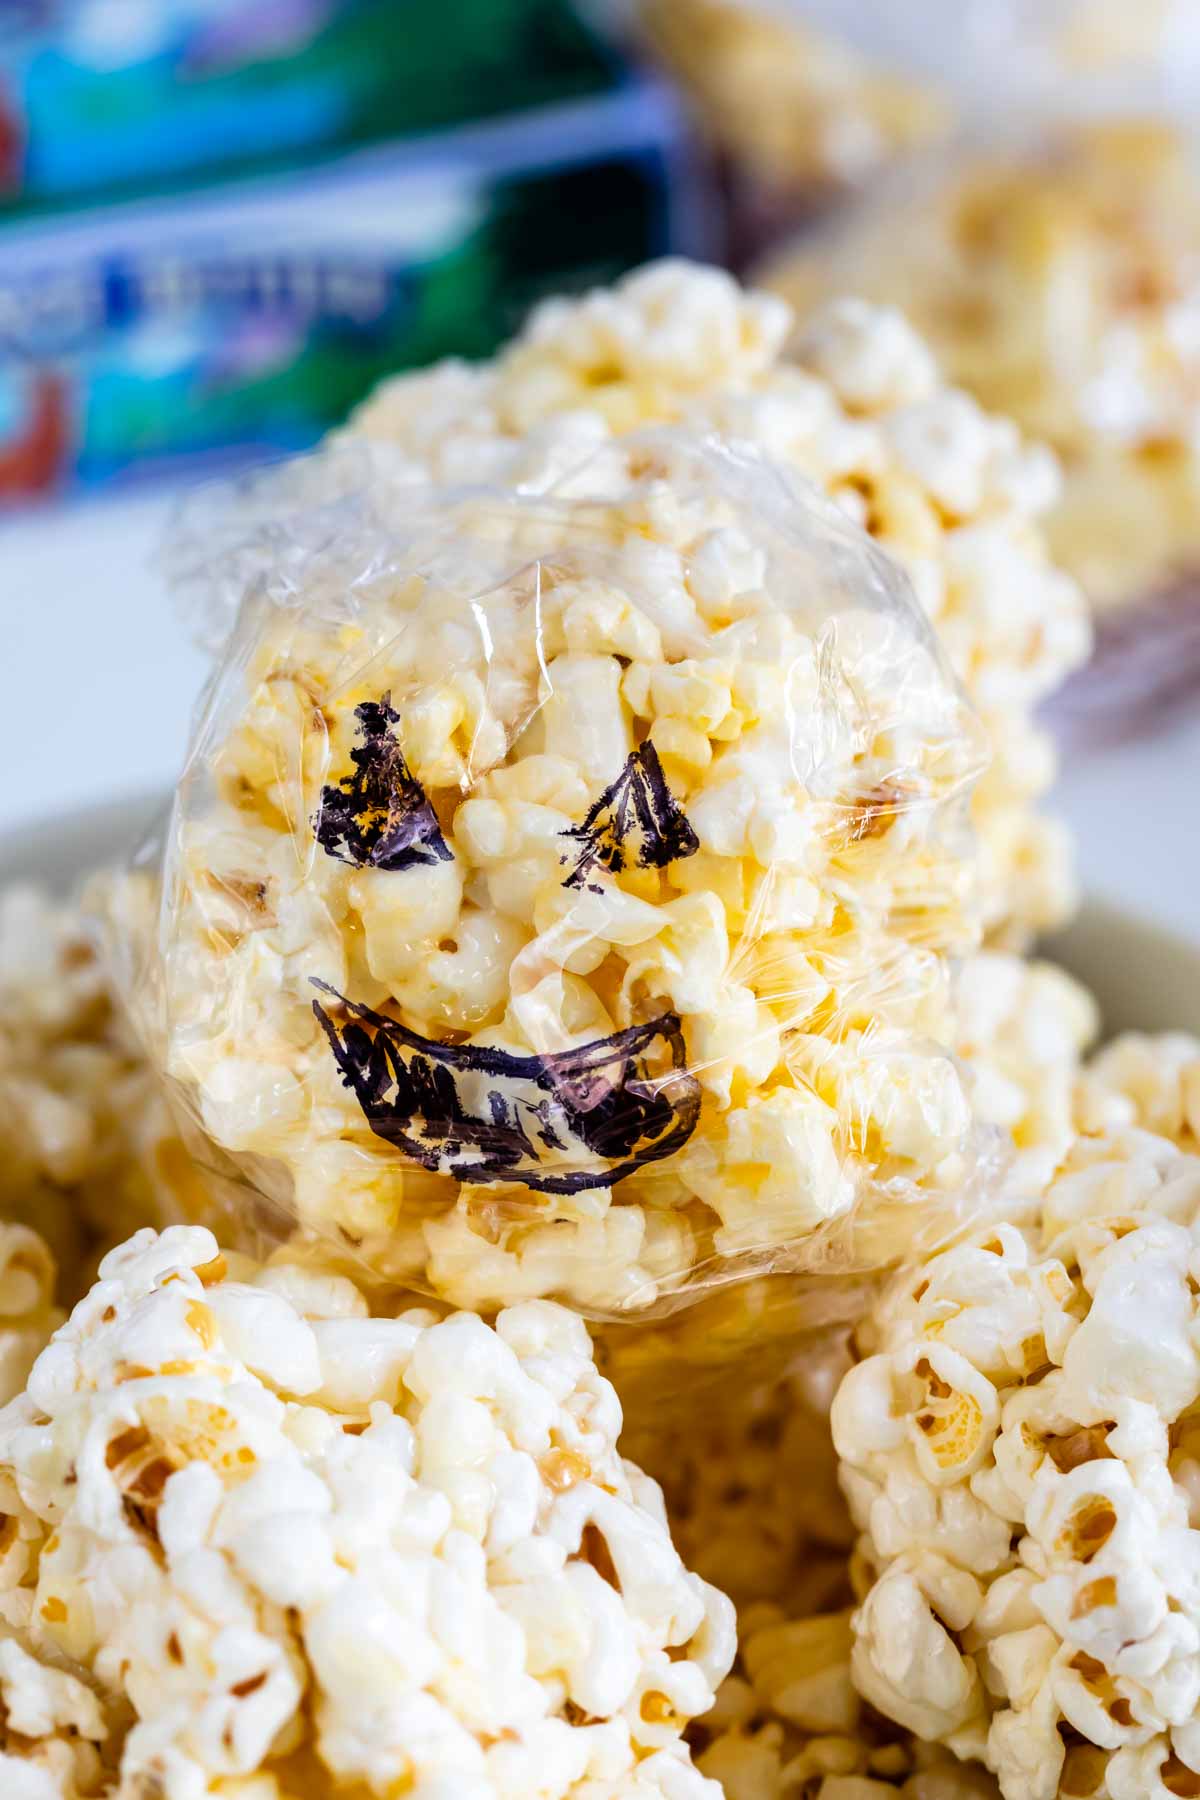 popcorn ball covered in plastic with jack o' lantern design